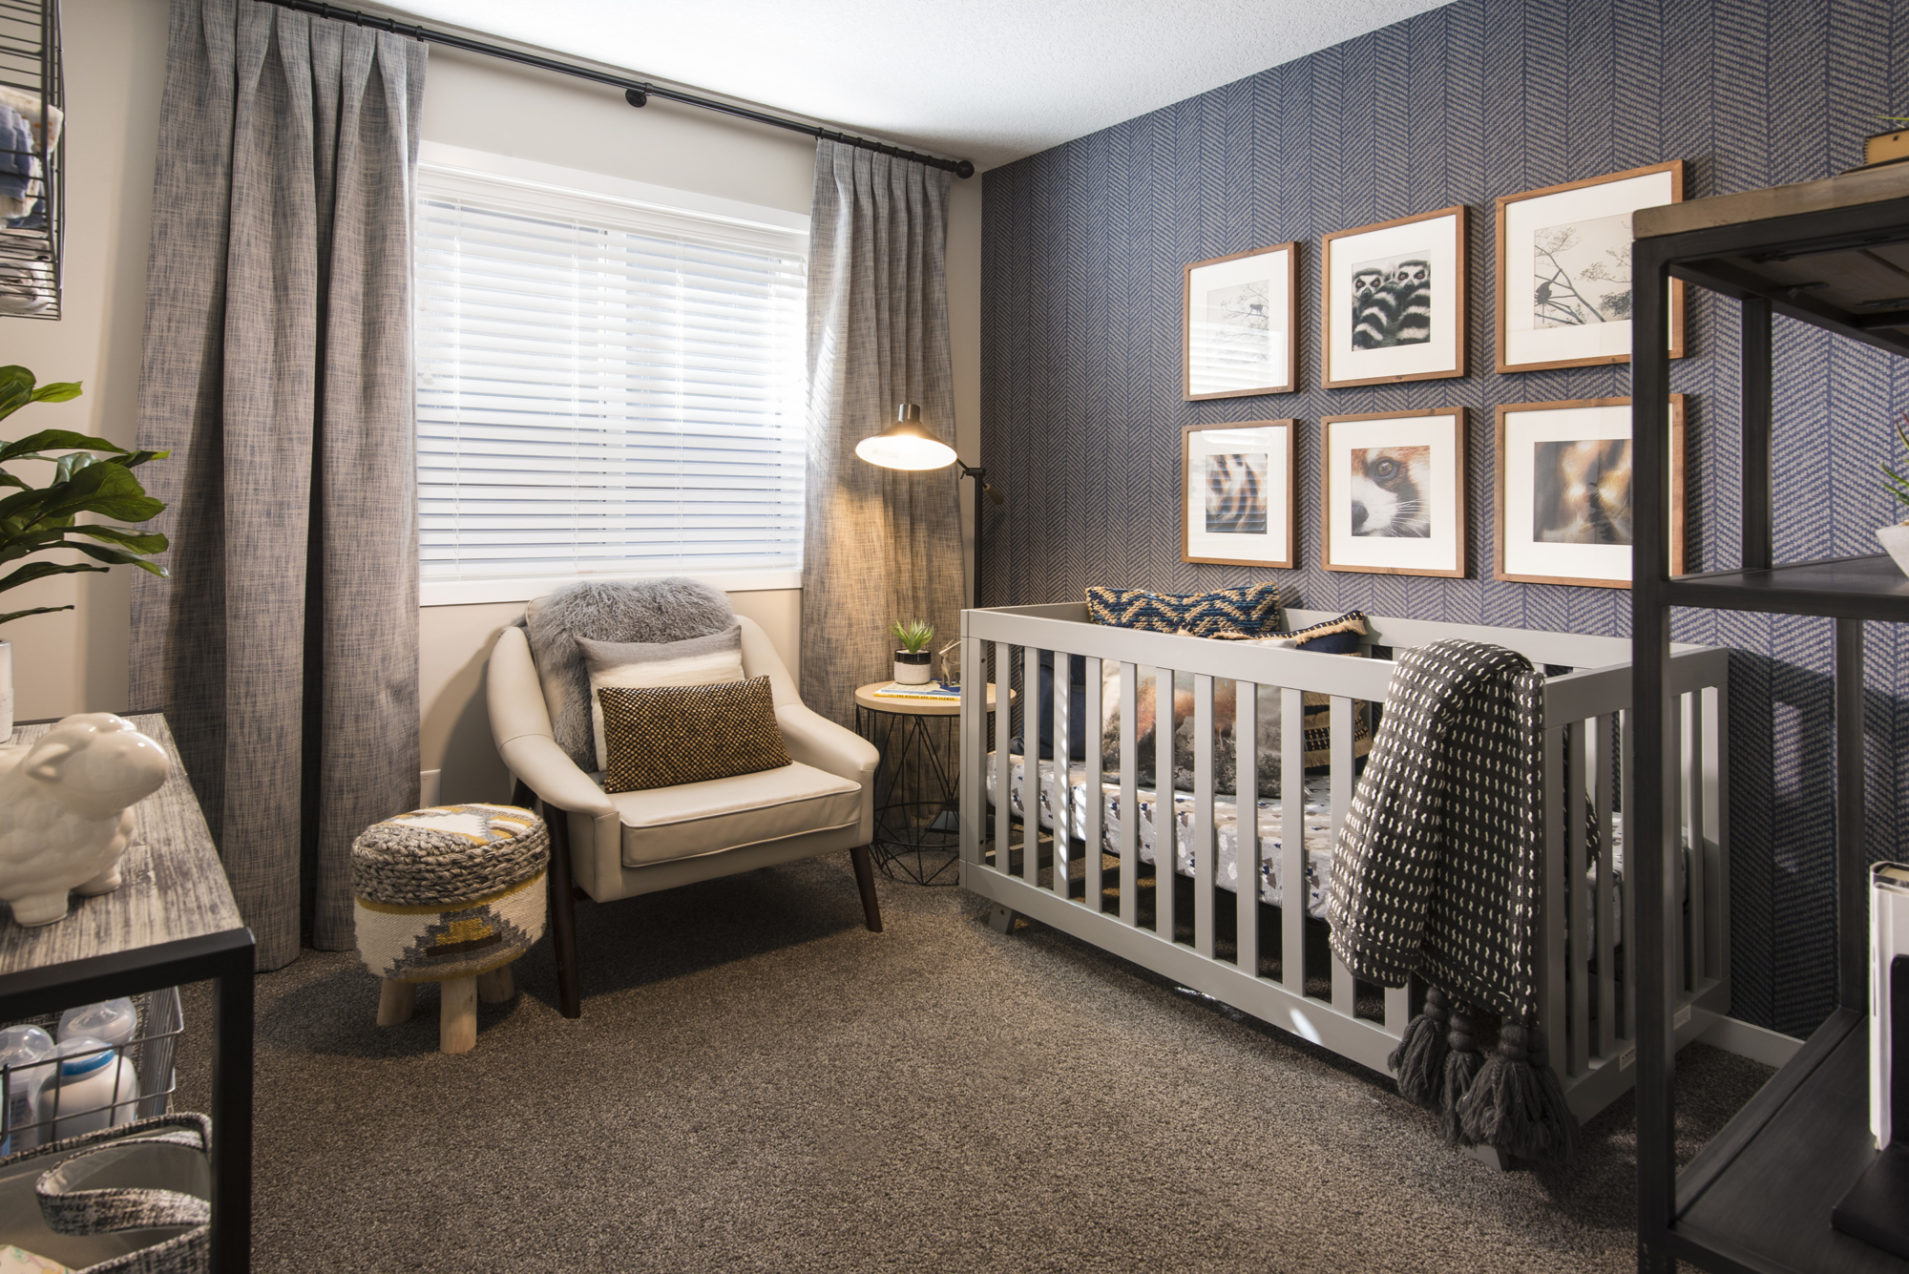 A carpeted bedroom with a crib, chair, shelving, and grey curtains.